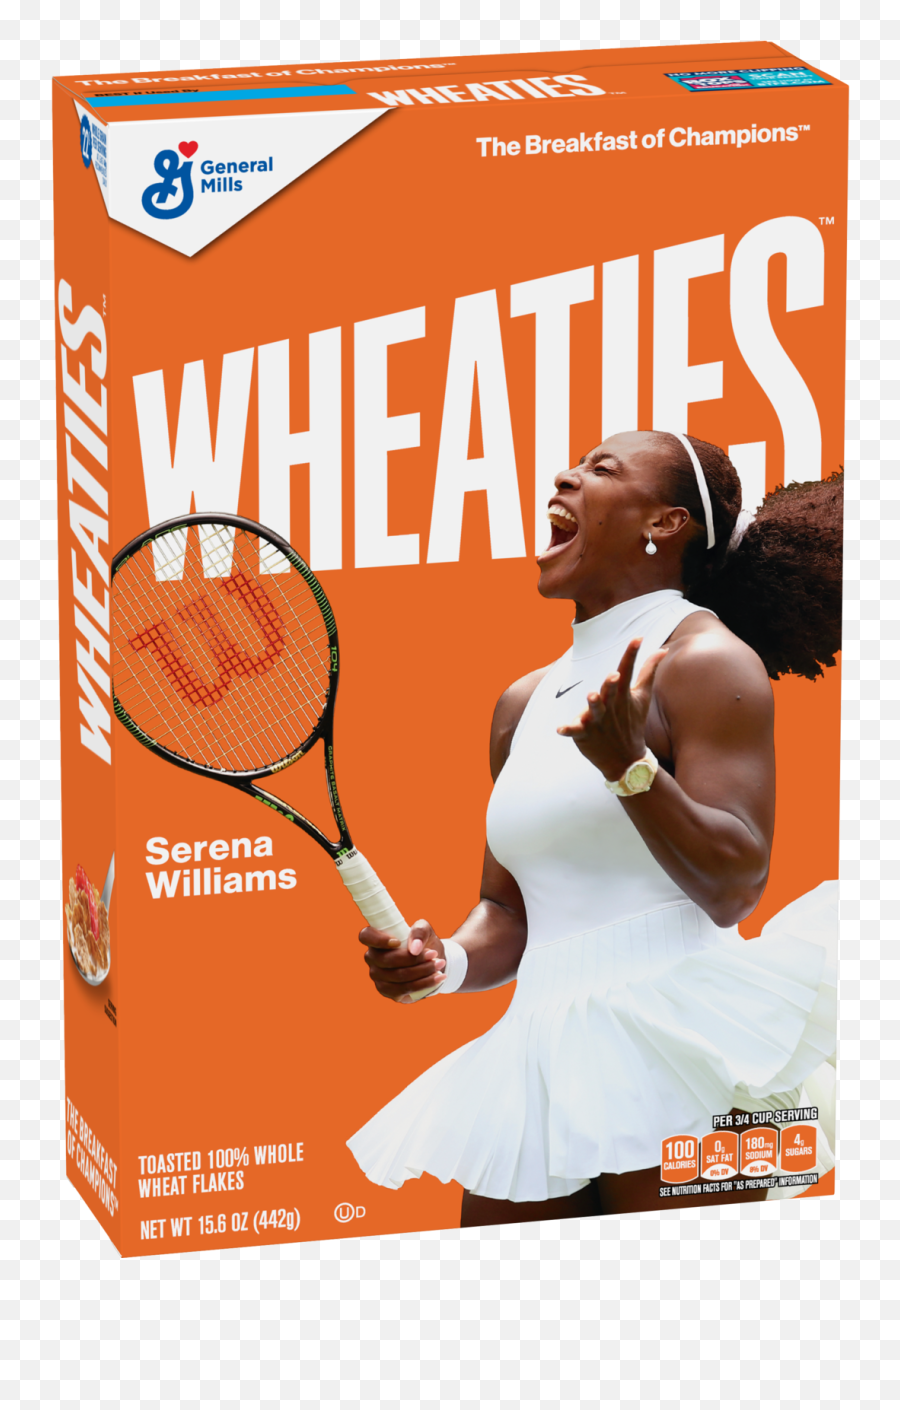 Serena Williams Finally Has Her Own Wheaties Box - Serena Williams Wheaties Emoji,Tennis Players On Managing Emotions